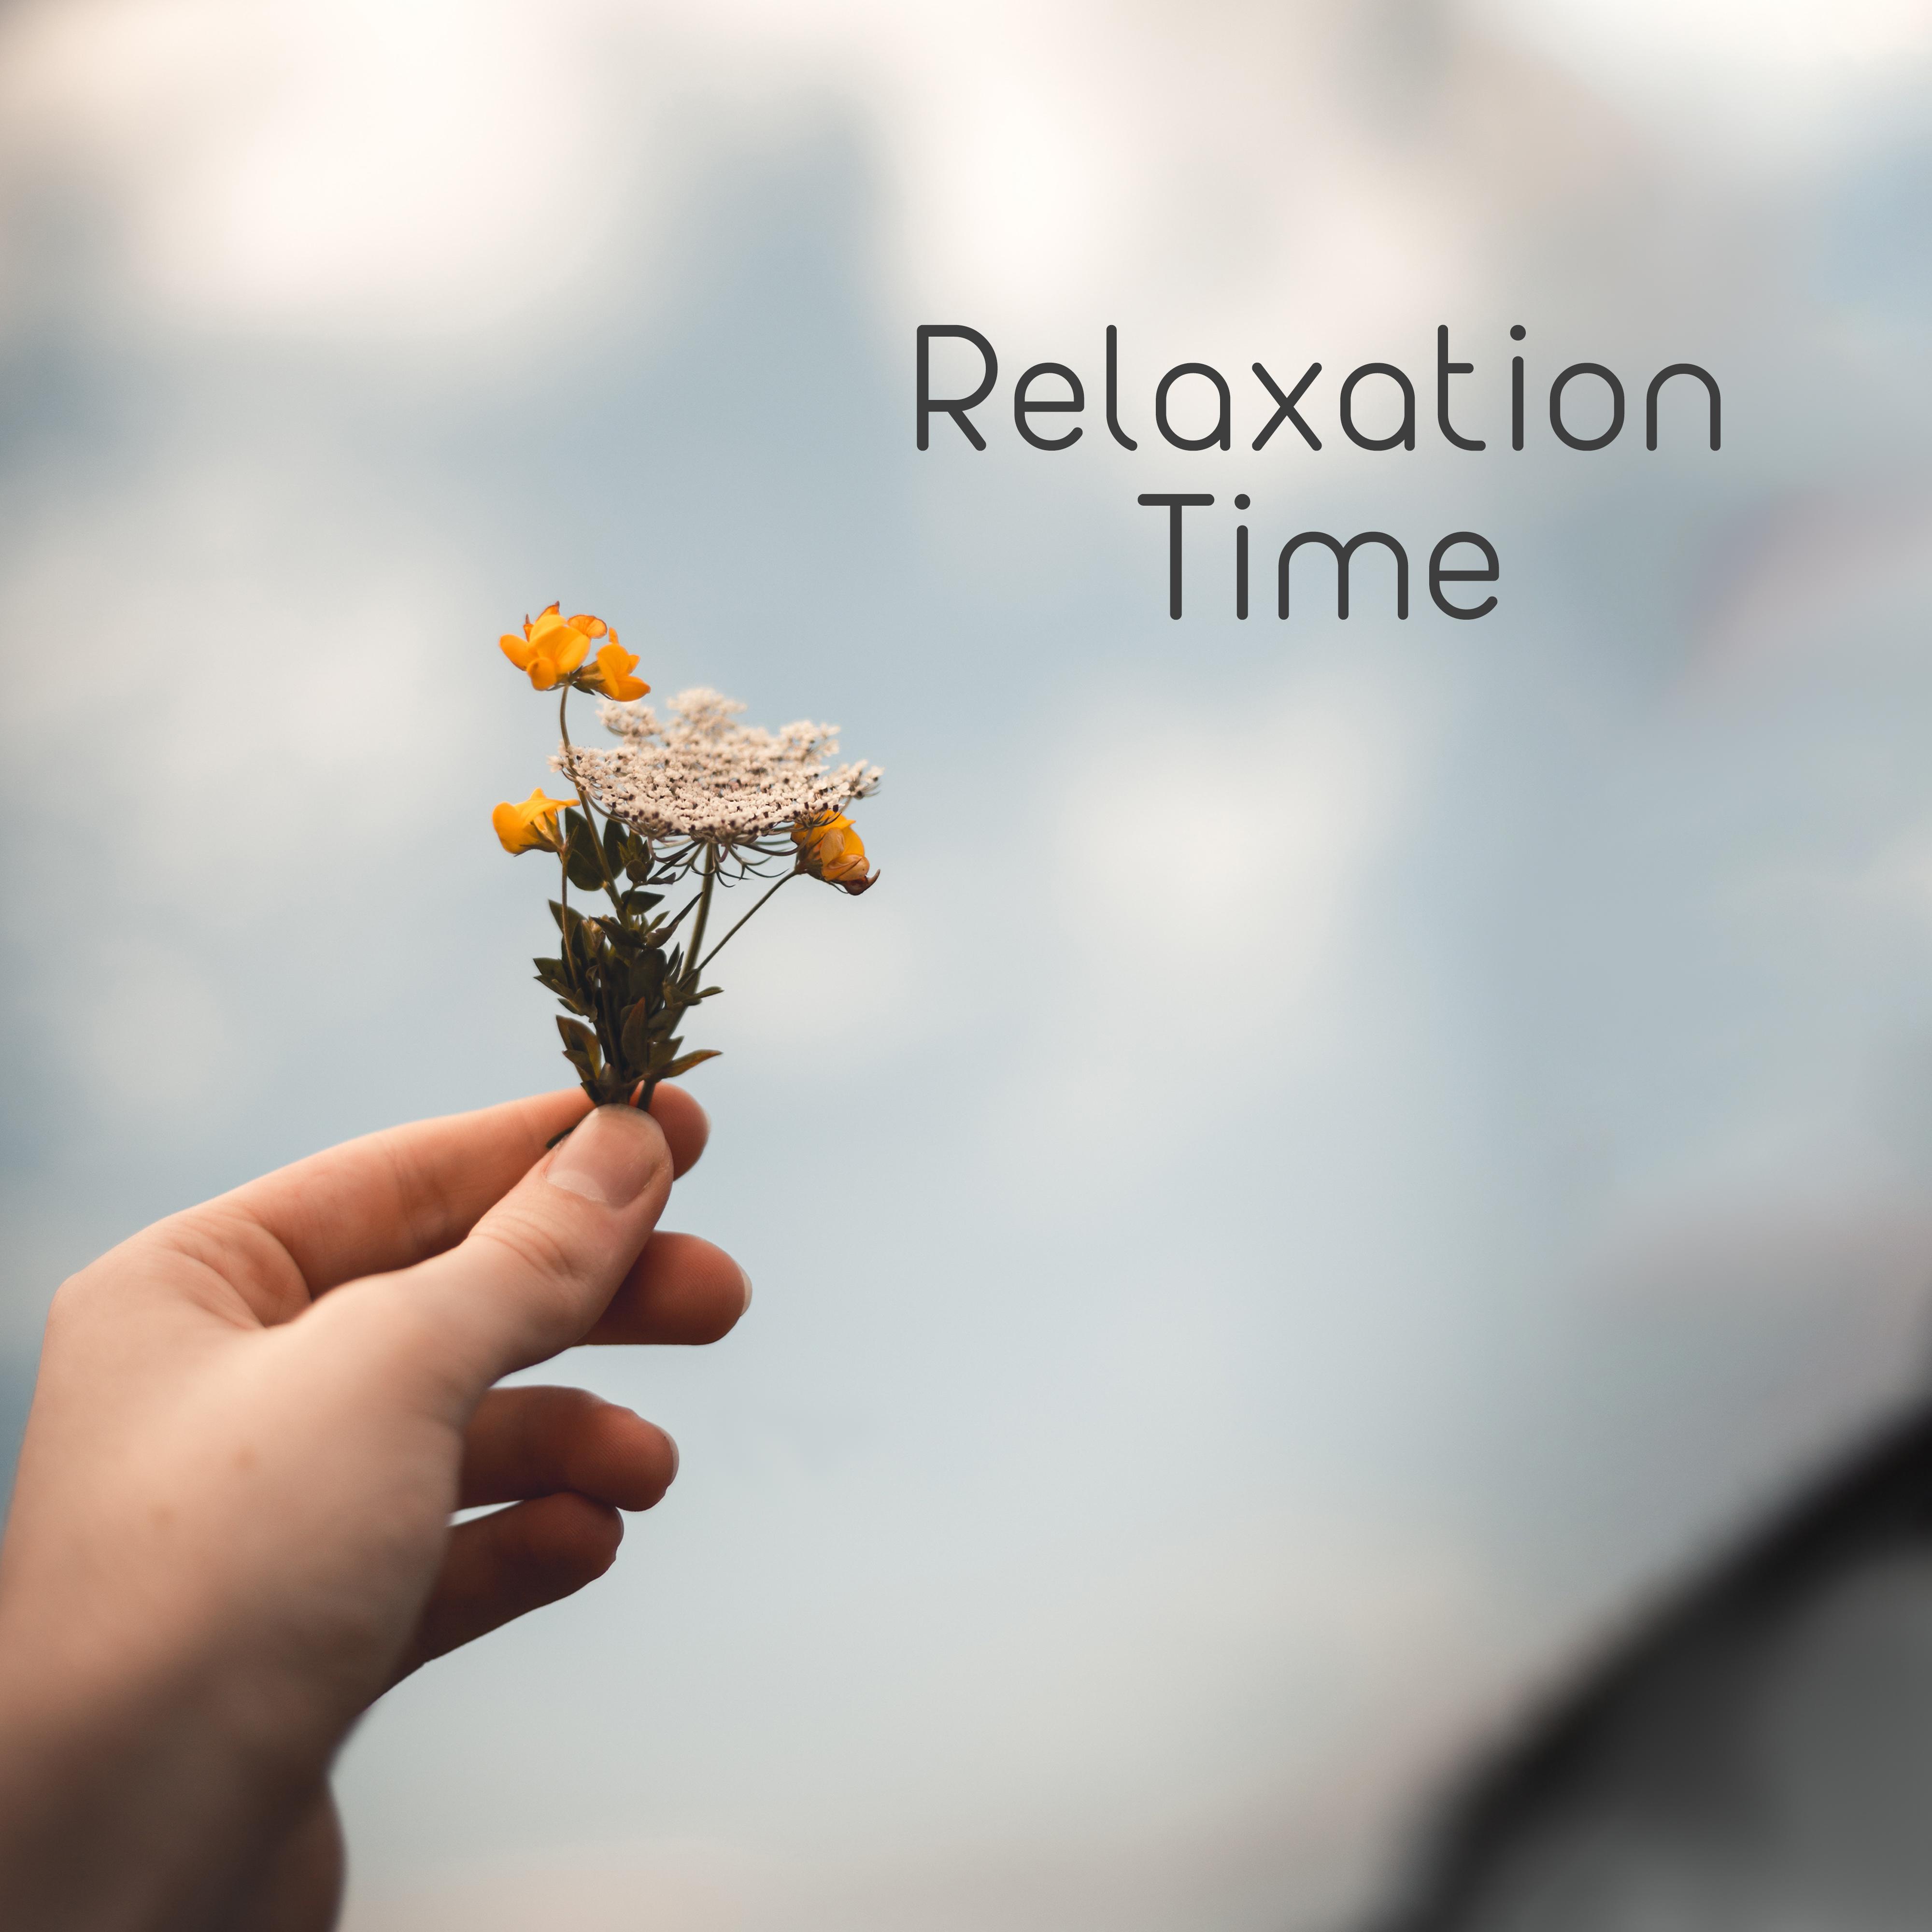 Relaxation Time – Meditation Music Zone, Kundalini Training for Relaxation, Ambient Yoga, Mindfulness Tracks to Calm Down, Inner Harmony, Yoga Relaxation